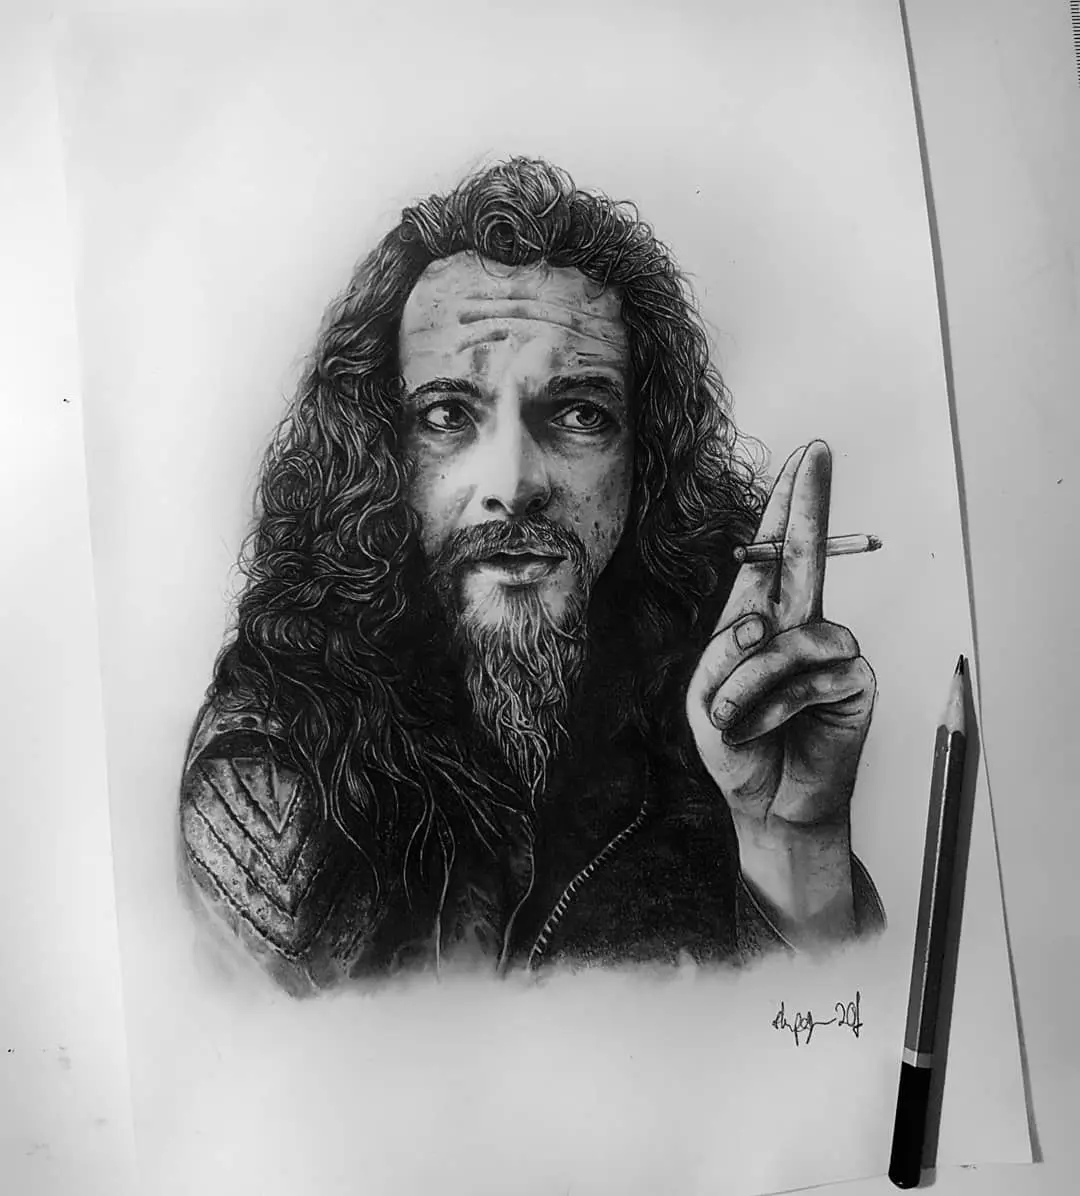 A little side project of mine... taking myself out of my comfort zone and trying something different, I&039;m practising black and grey portraits in pencil (not black ink whaaaat! ) of the artists I love. This is Ian Anderson from @jethrotull_ which took quite a time but was very fun to do 🖤
.
.
.
.
.
.
.
.
occultarcana artesobscurae btattooing flashworkers blackwork blackworkers blxckink darkartists darkart darkarts thedarkestwork onlyblackart onlythedarkest stabmegod blacktattoo metalhead blackmetal occult wiccac witchythings darkartistries edinburgh goth gothic studioxiii @artesobscurae @occultarcana @thedarkestwork @onlythedarkest @black_tattoo_culture @darkartists @wiccac @darkartistries